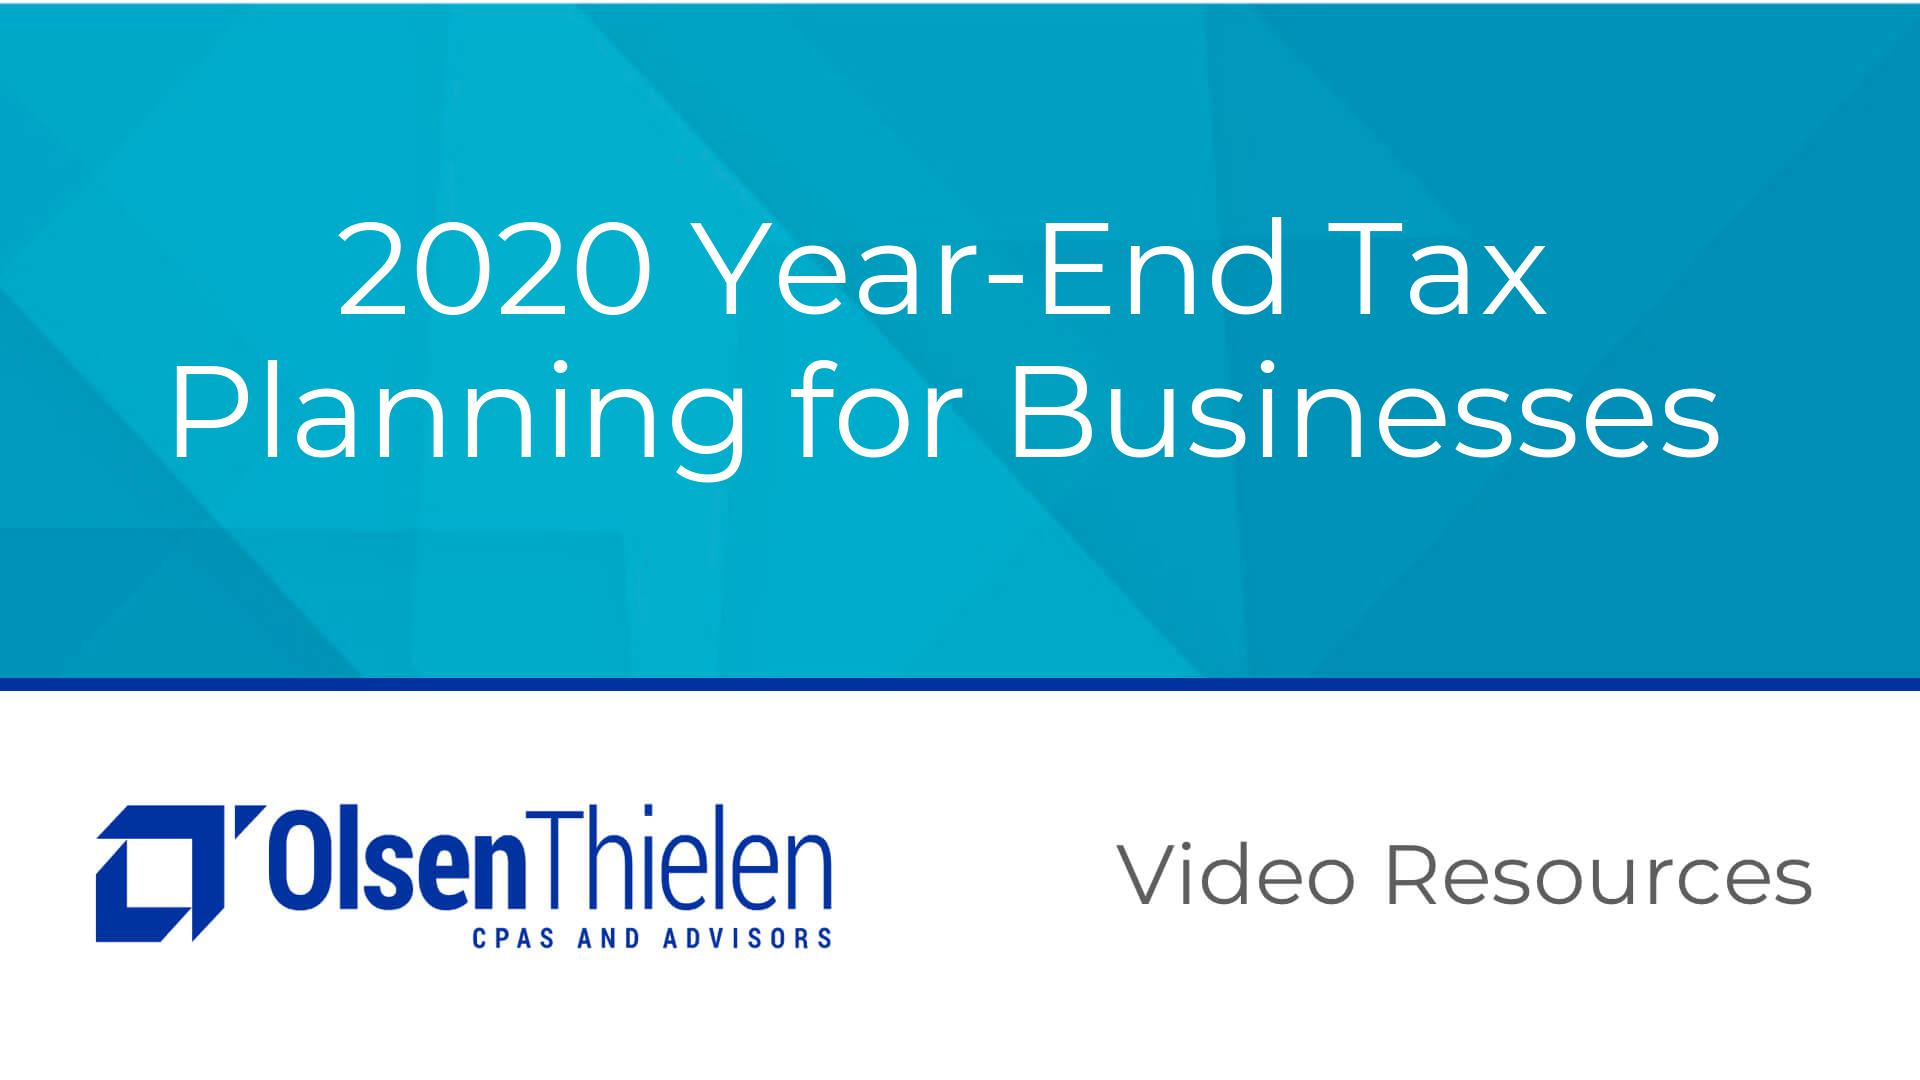 2020 Year-End Tax Planning for Businesses